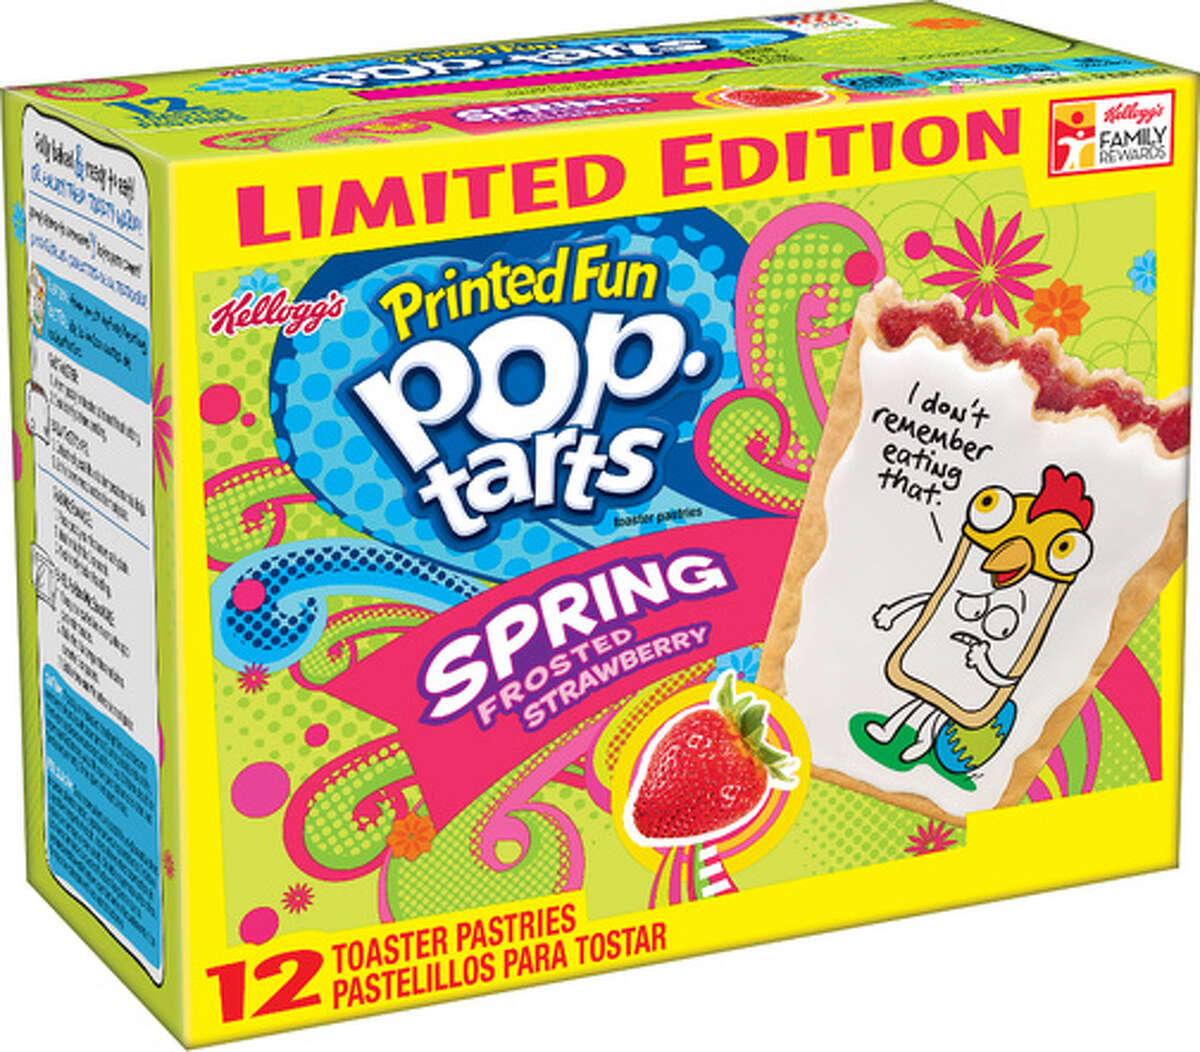 The five new PopTarts flavors sound fantastically frightening